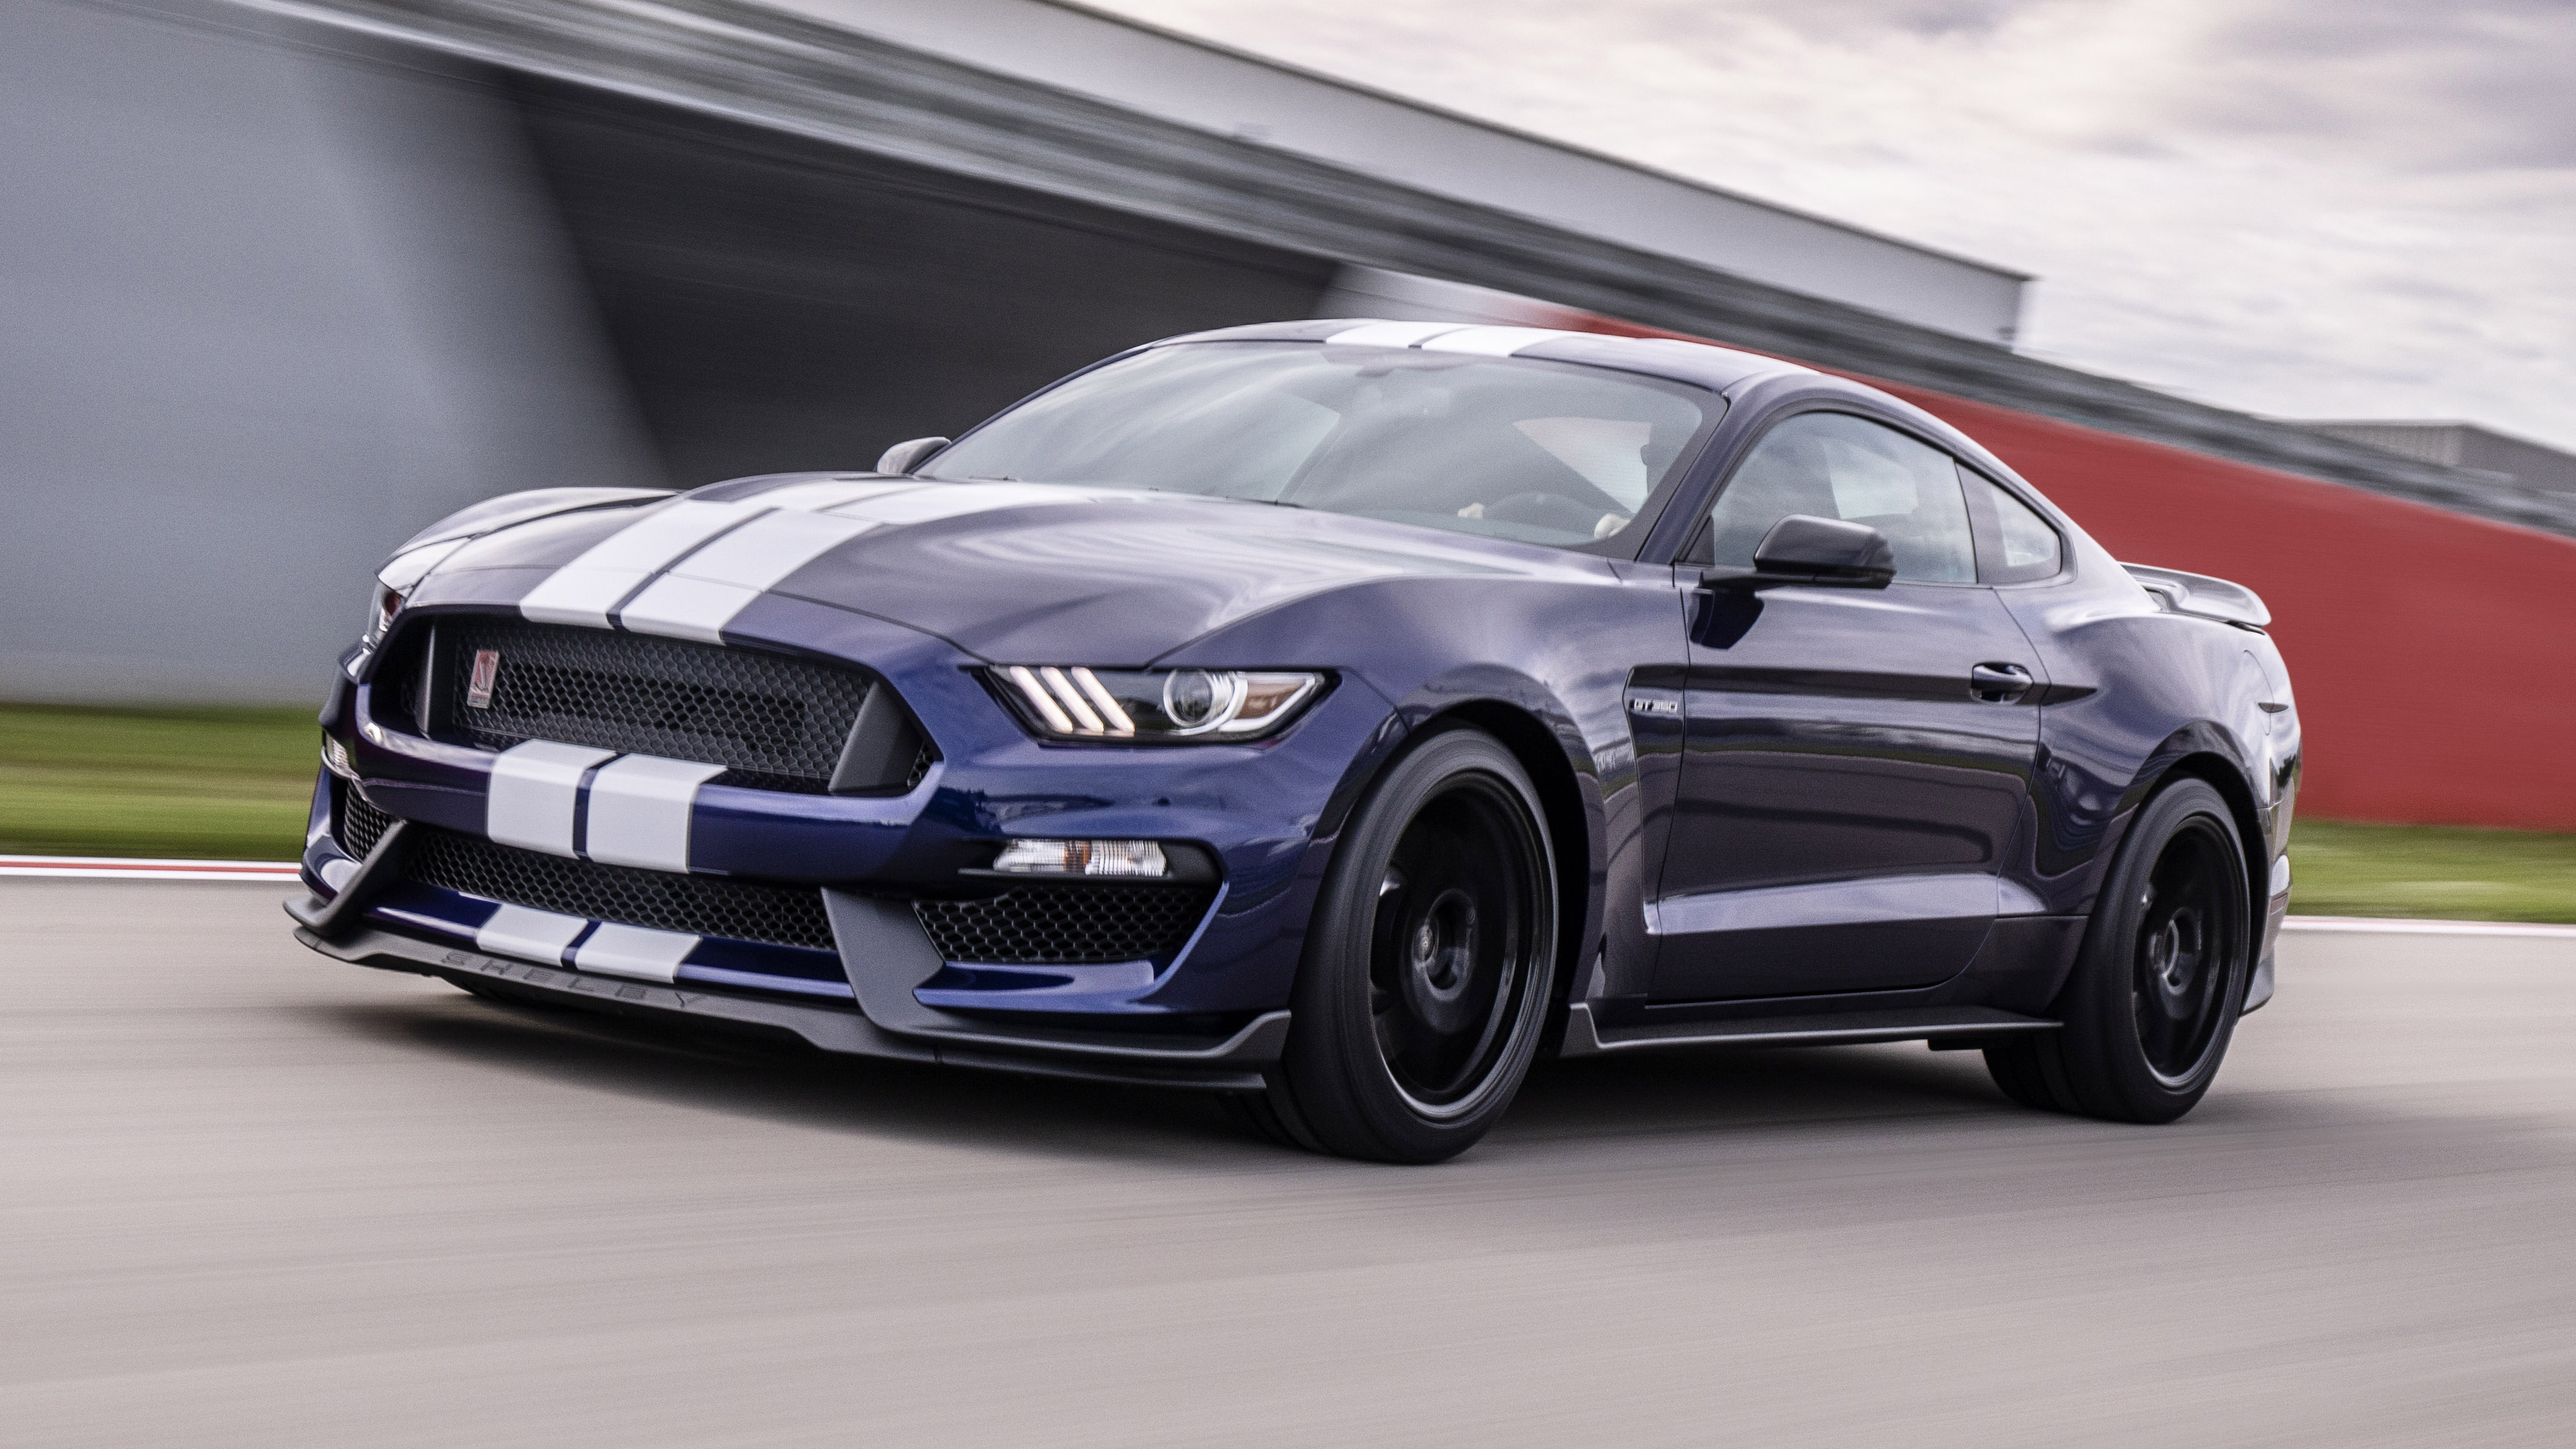 The Ford Mustang Shelby GT350 has been upgraded | Top Gear